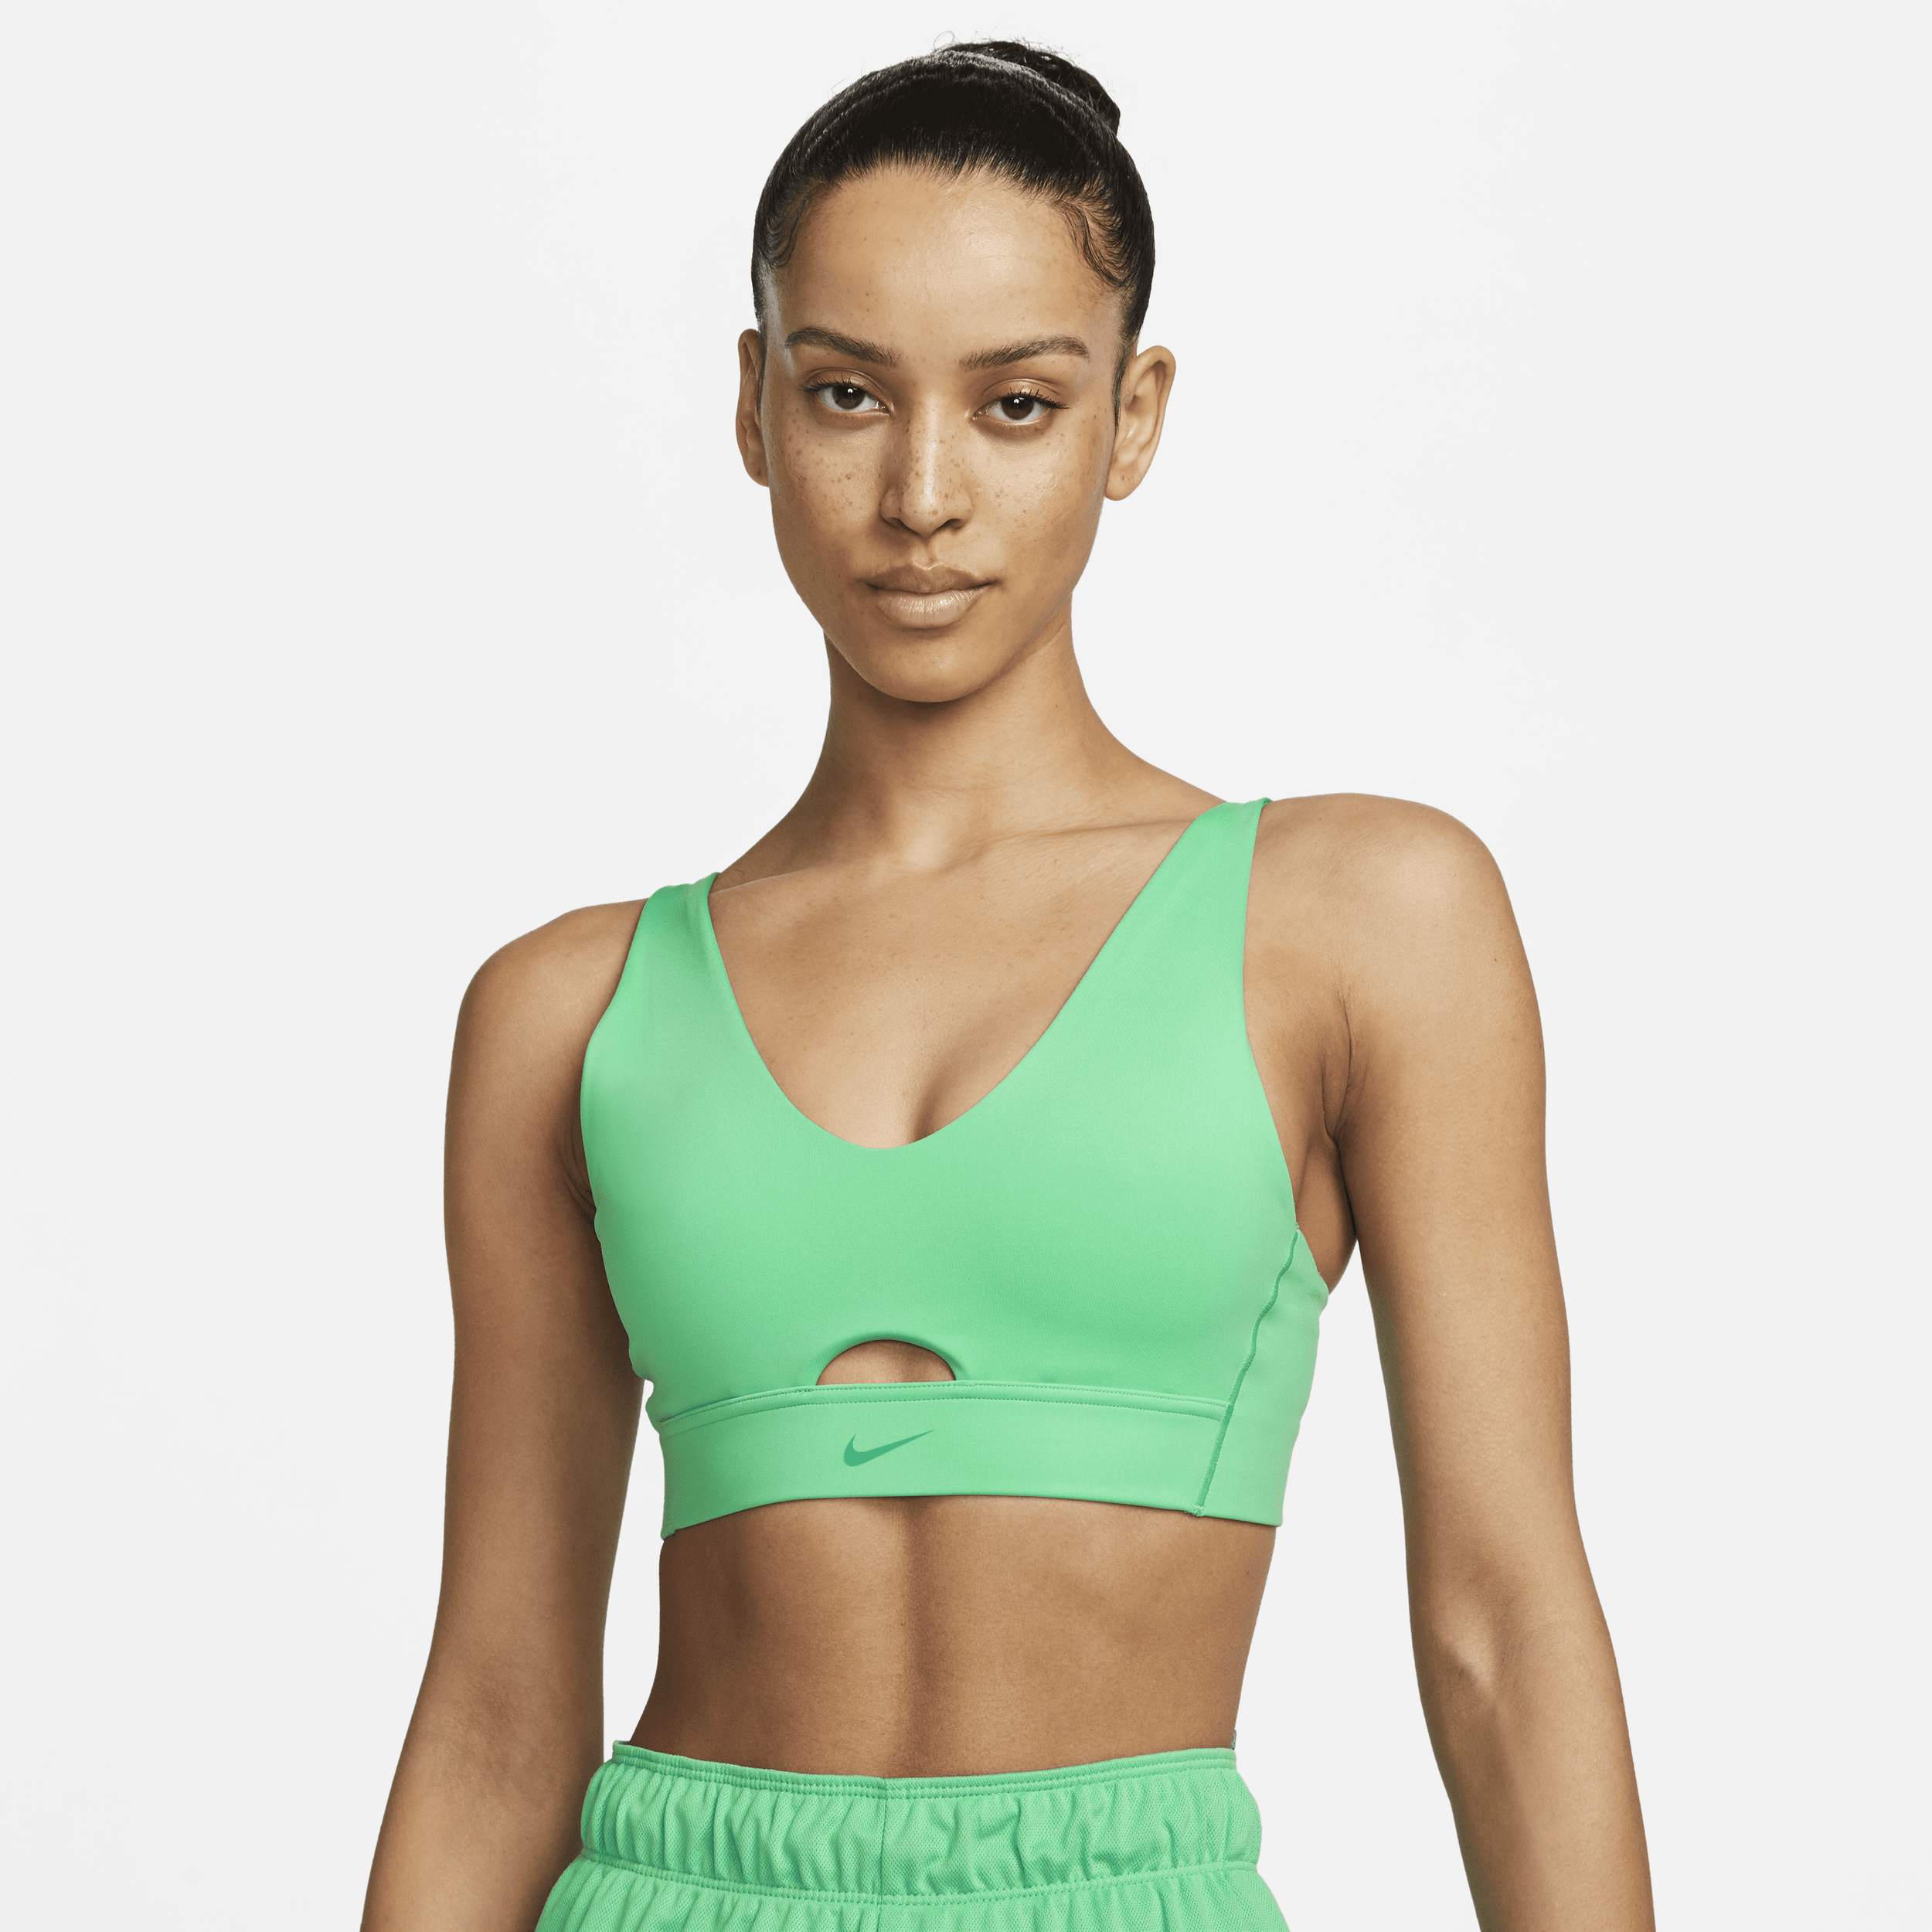 Nike Indy Sports Bra in Oil Green Matcha [XS] - DEADSTOCK, Women's Fashion,  Activewear on Carousell